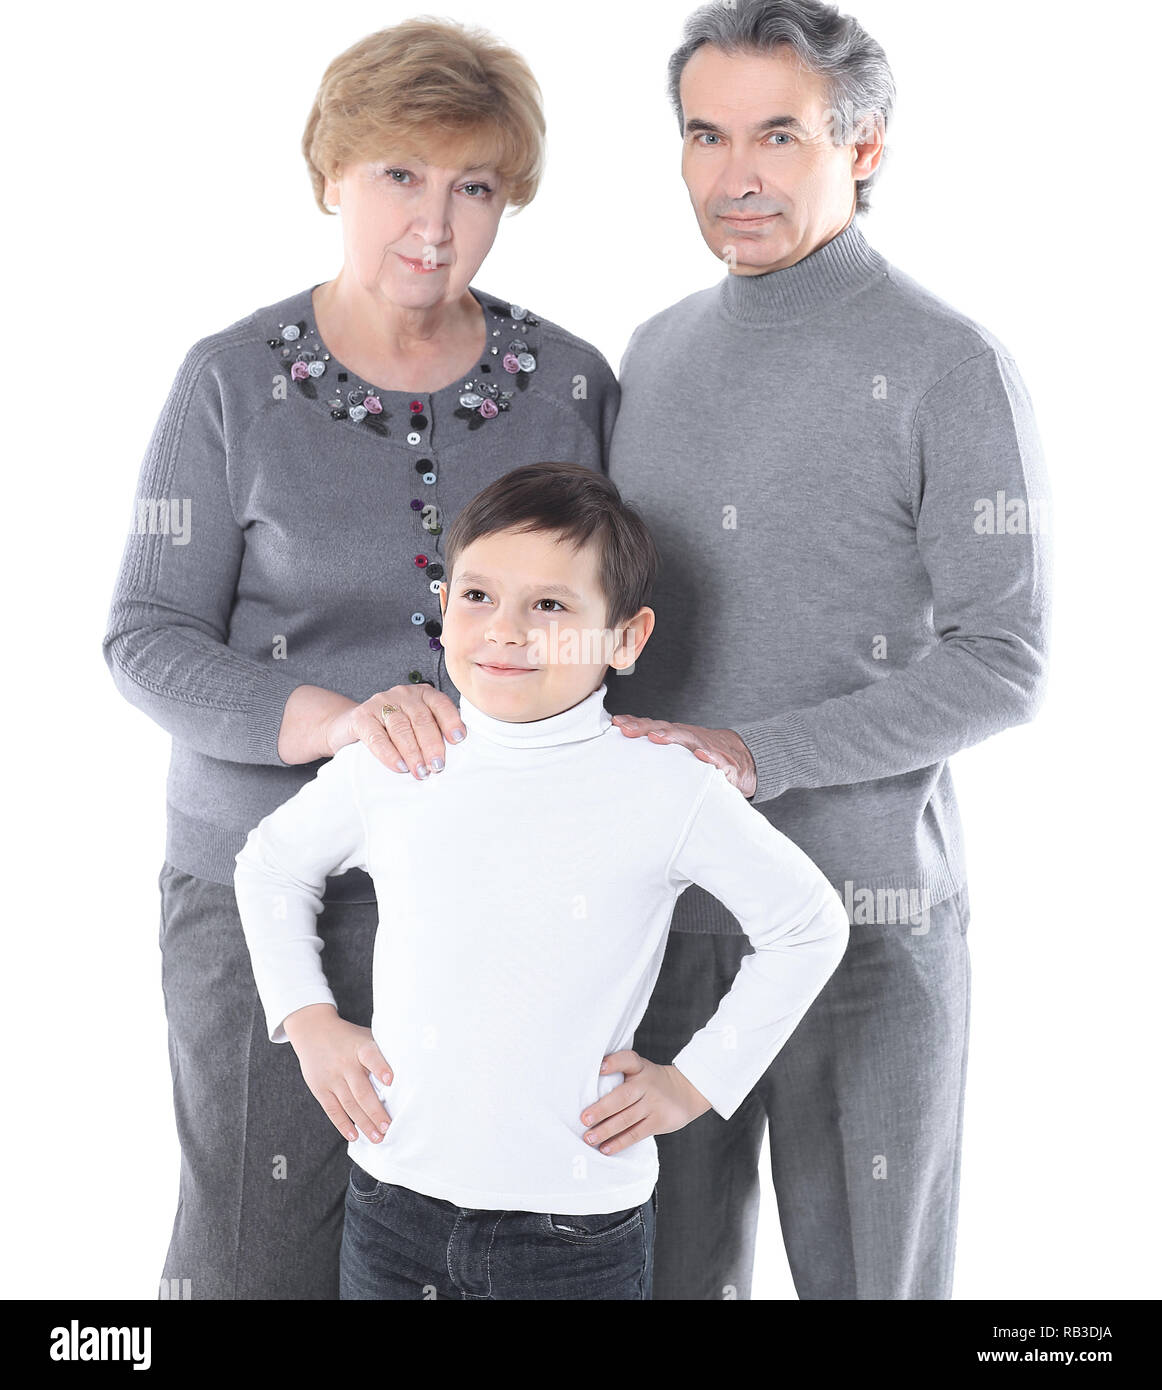 family photo of grandma grandpa and the grandson.isolated on white background Stock Photo